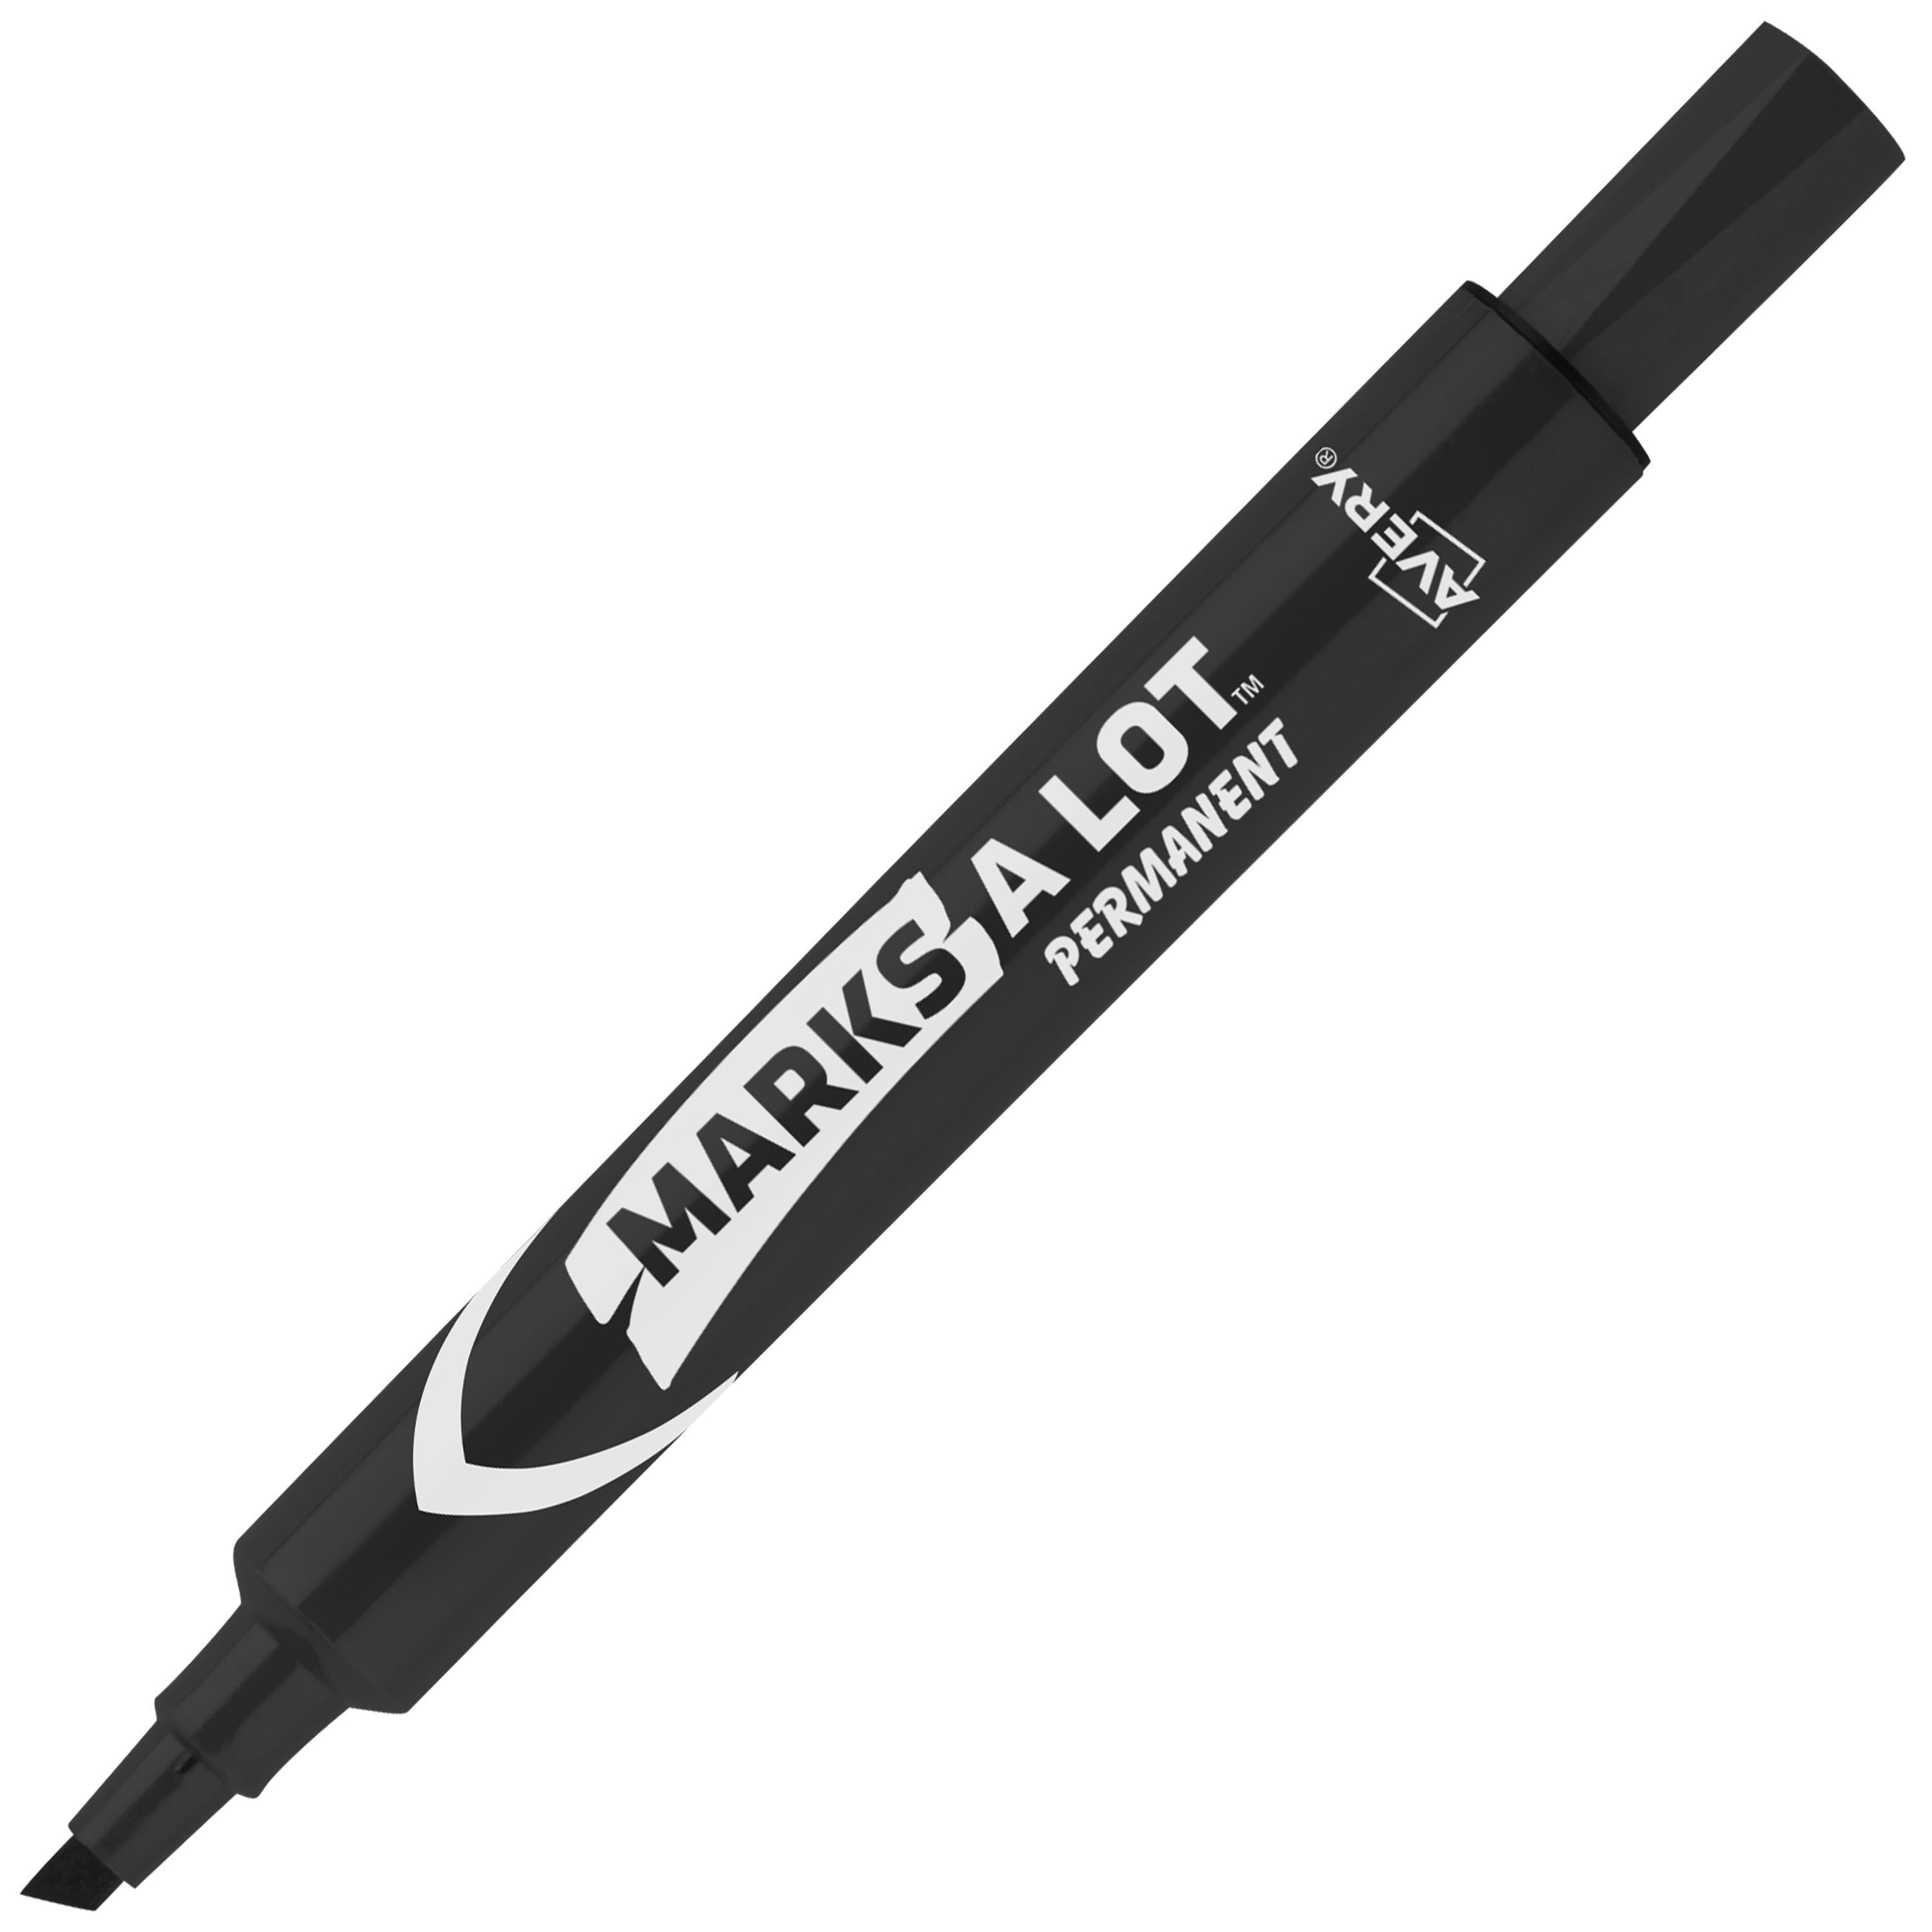 Shuttle Art Permanent Markers, 50 Pack Black Permanent Marker set,Fine Point, Works on Plastic,Wood,Stone,Metal and Glass for Doodling, Marking